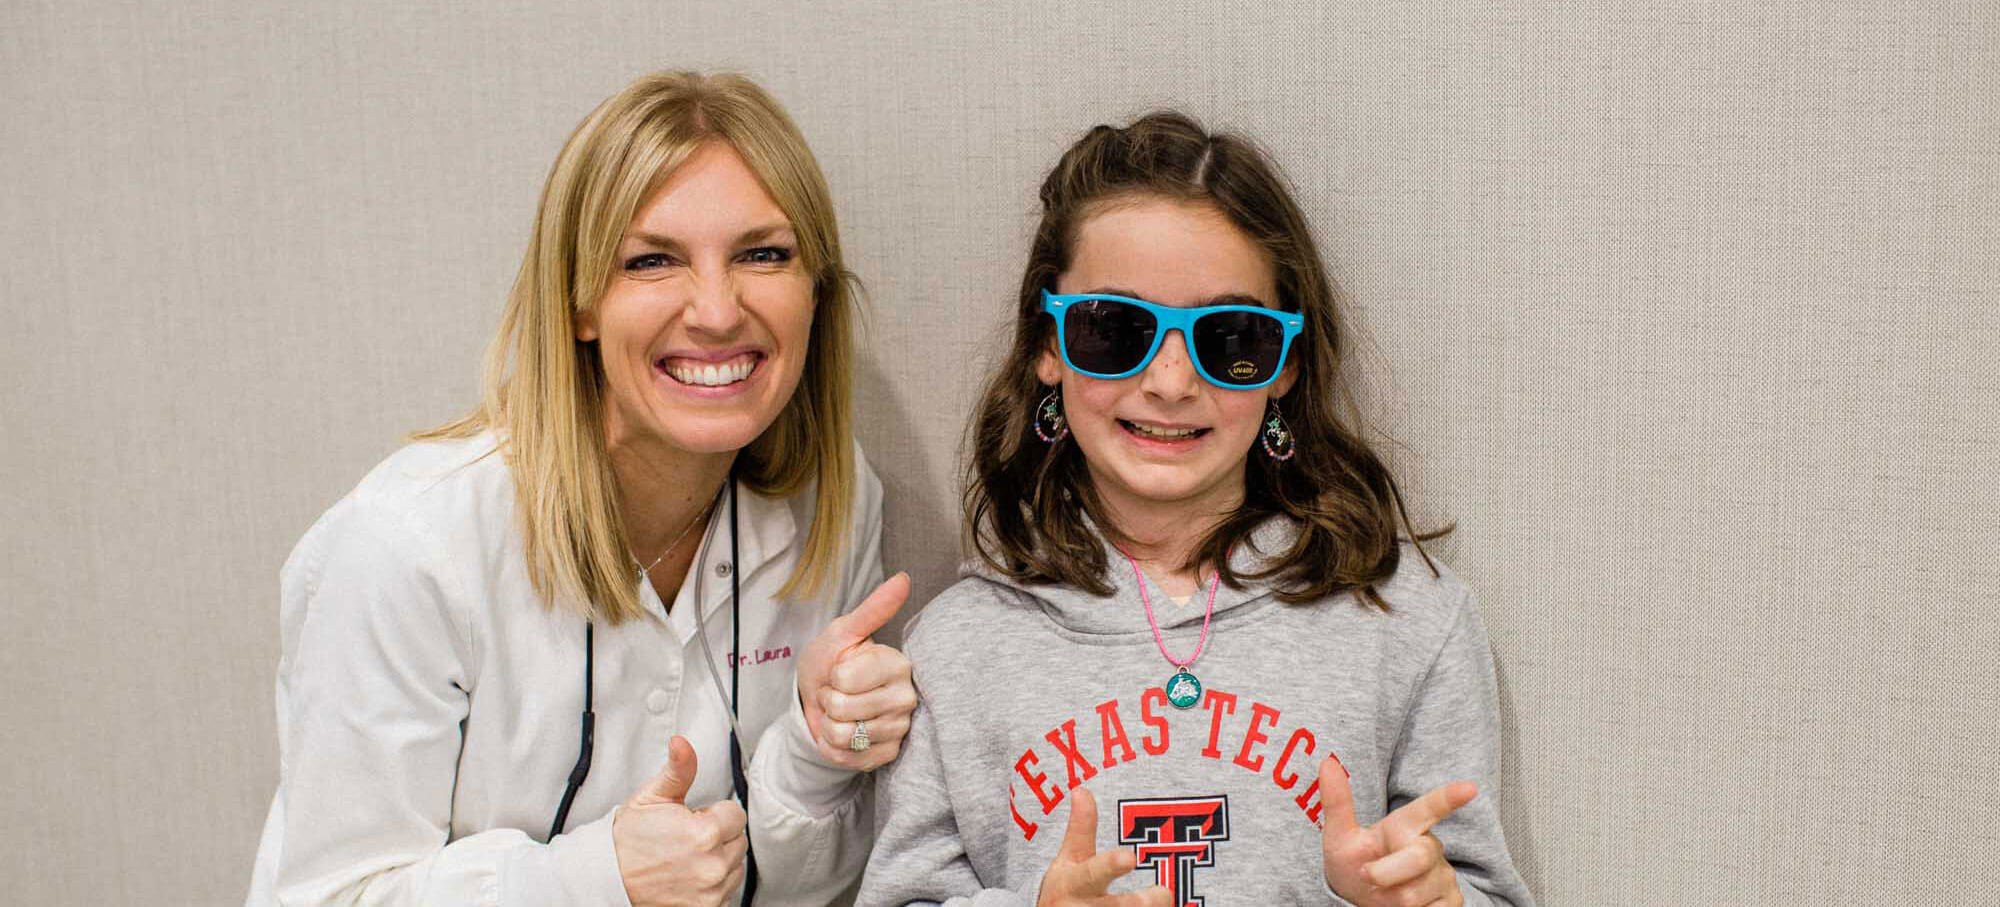 Dr. Cook smiles and gives a thumbs-up with a young patient, who wears protective dental exam sunglasses and smiles while giving two playful finger-guns.